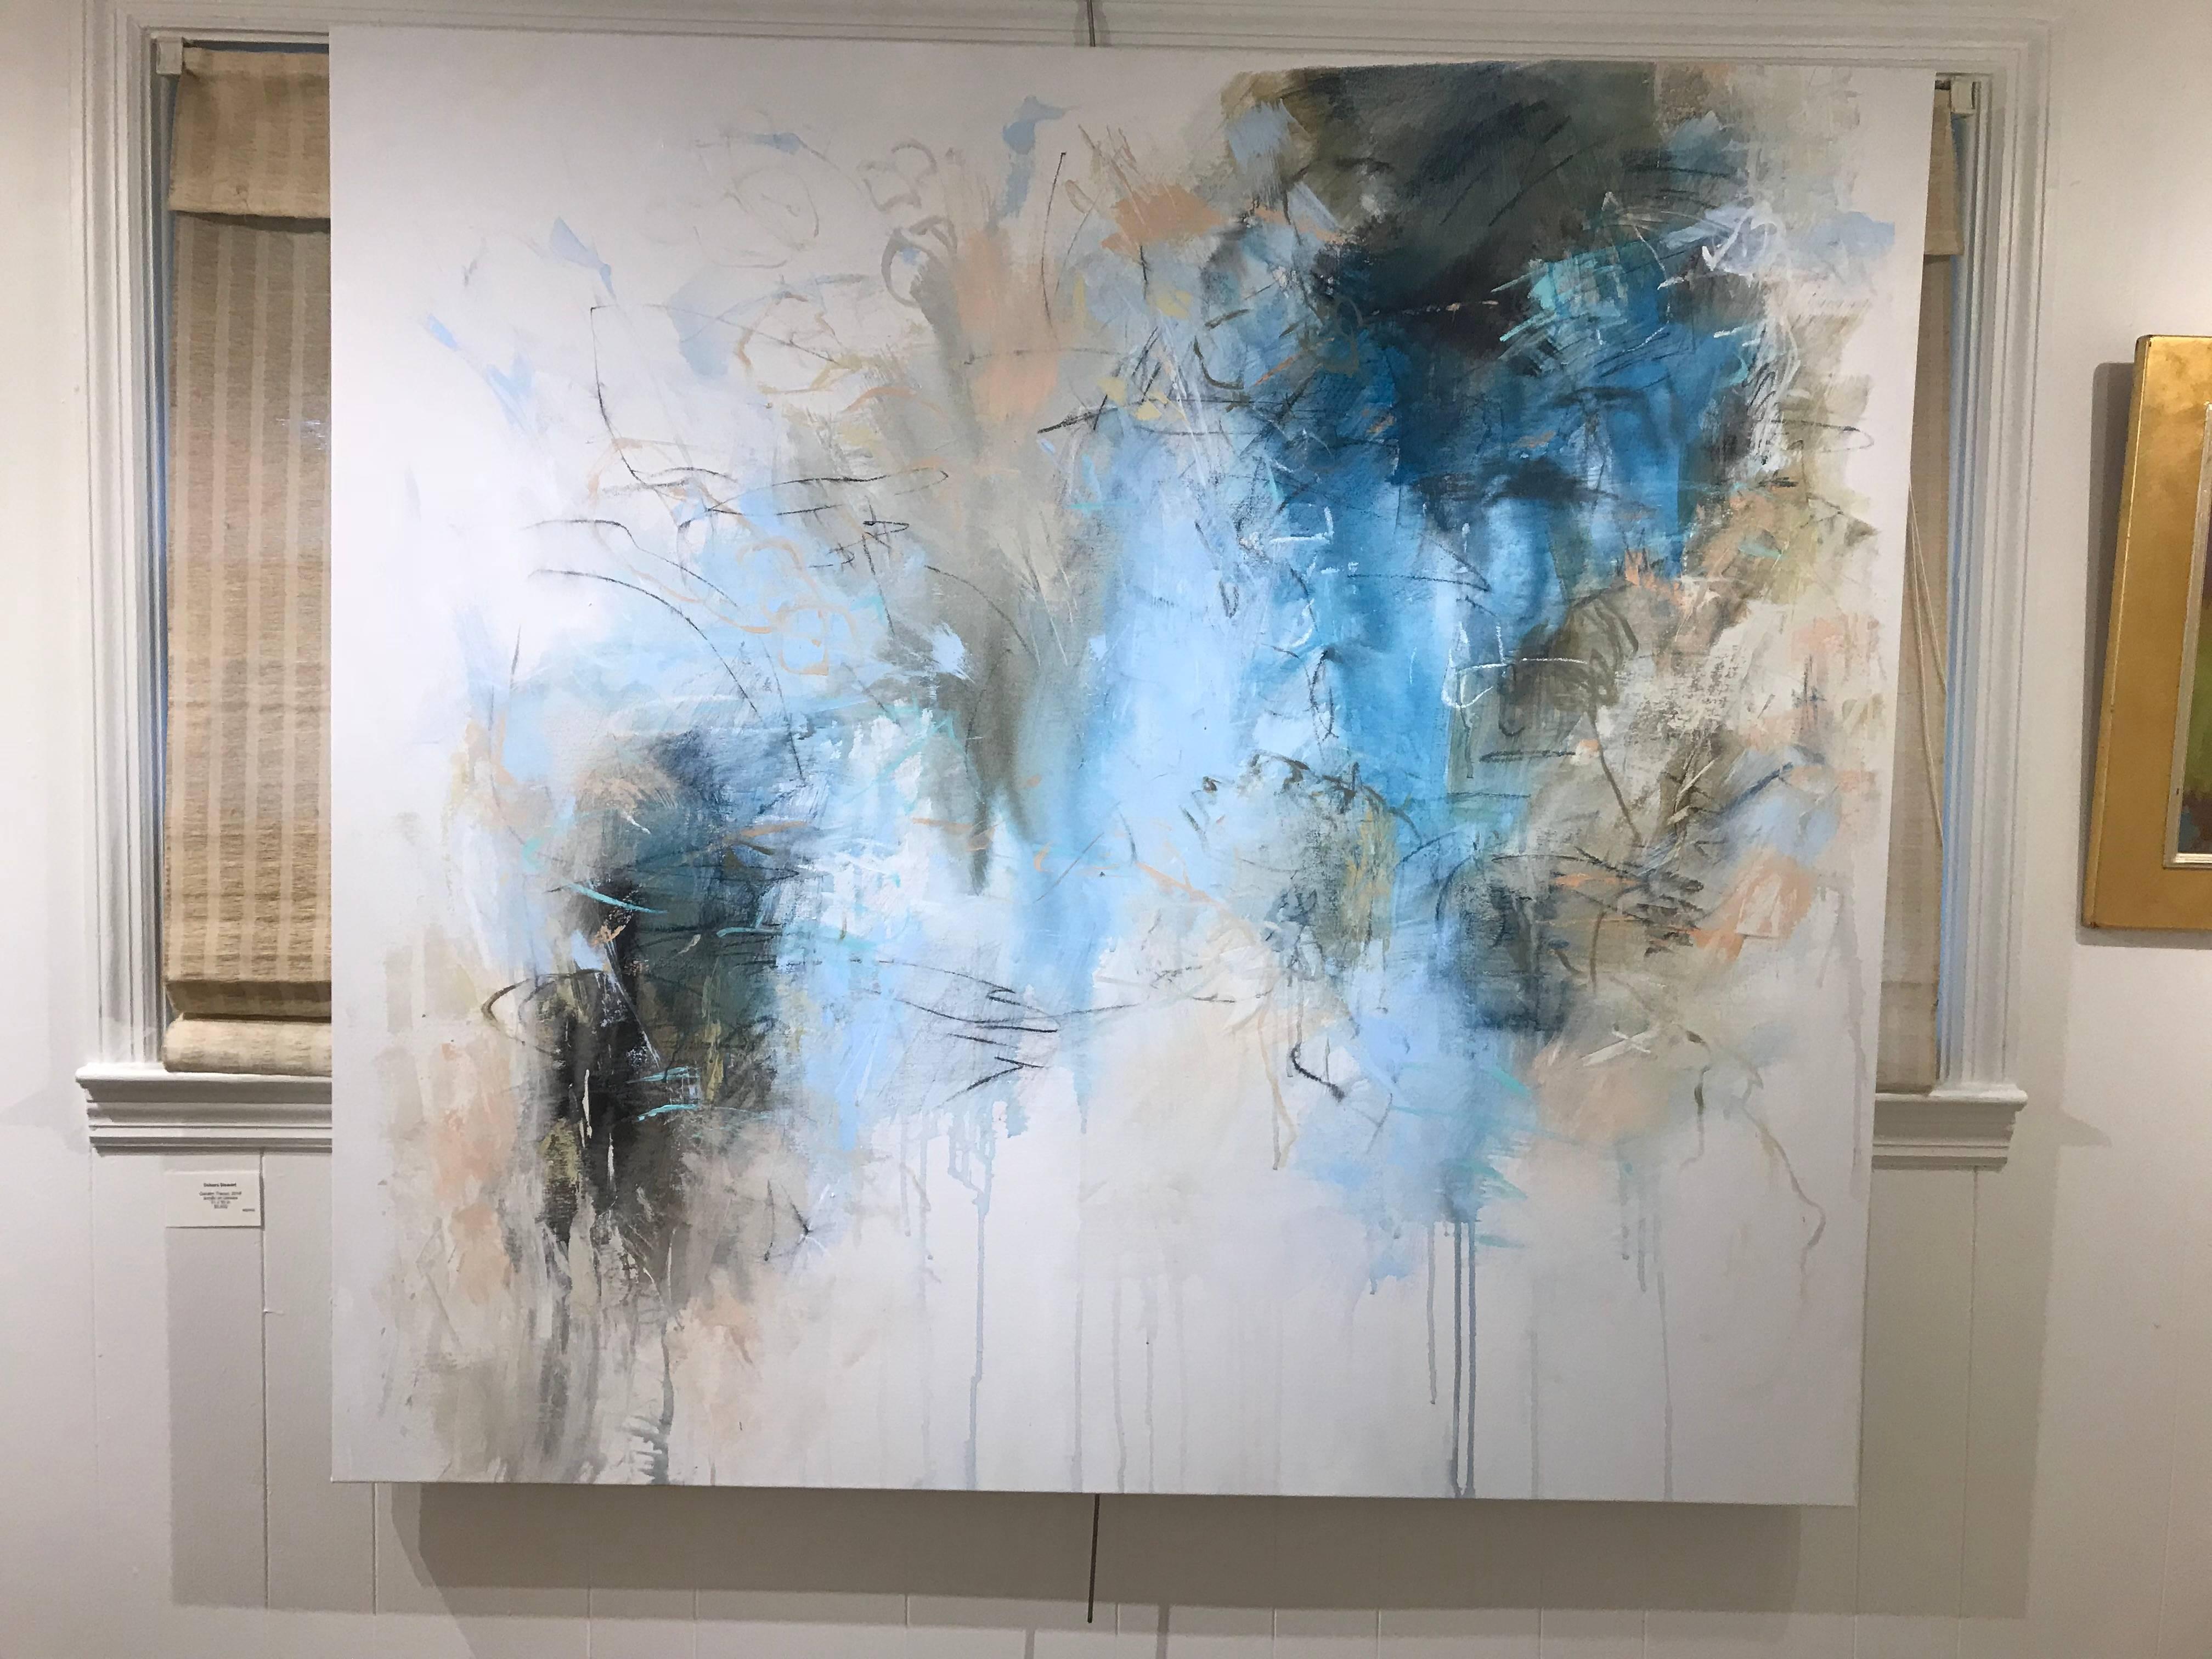 'Garden Traces' is a large abstract acrylic on canvas painting created by American artist Debora Stewart in 2018. Painted in a nearly square format, the piece showcases an exquisite arrangement of blue, back and golden tones, playing beautifully